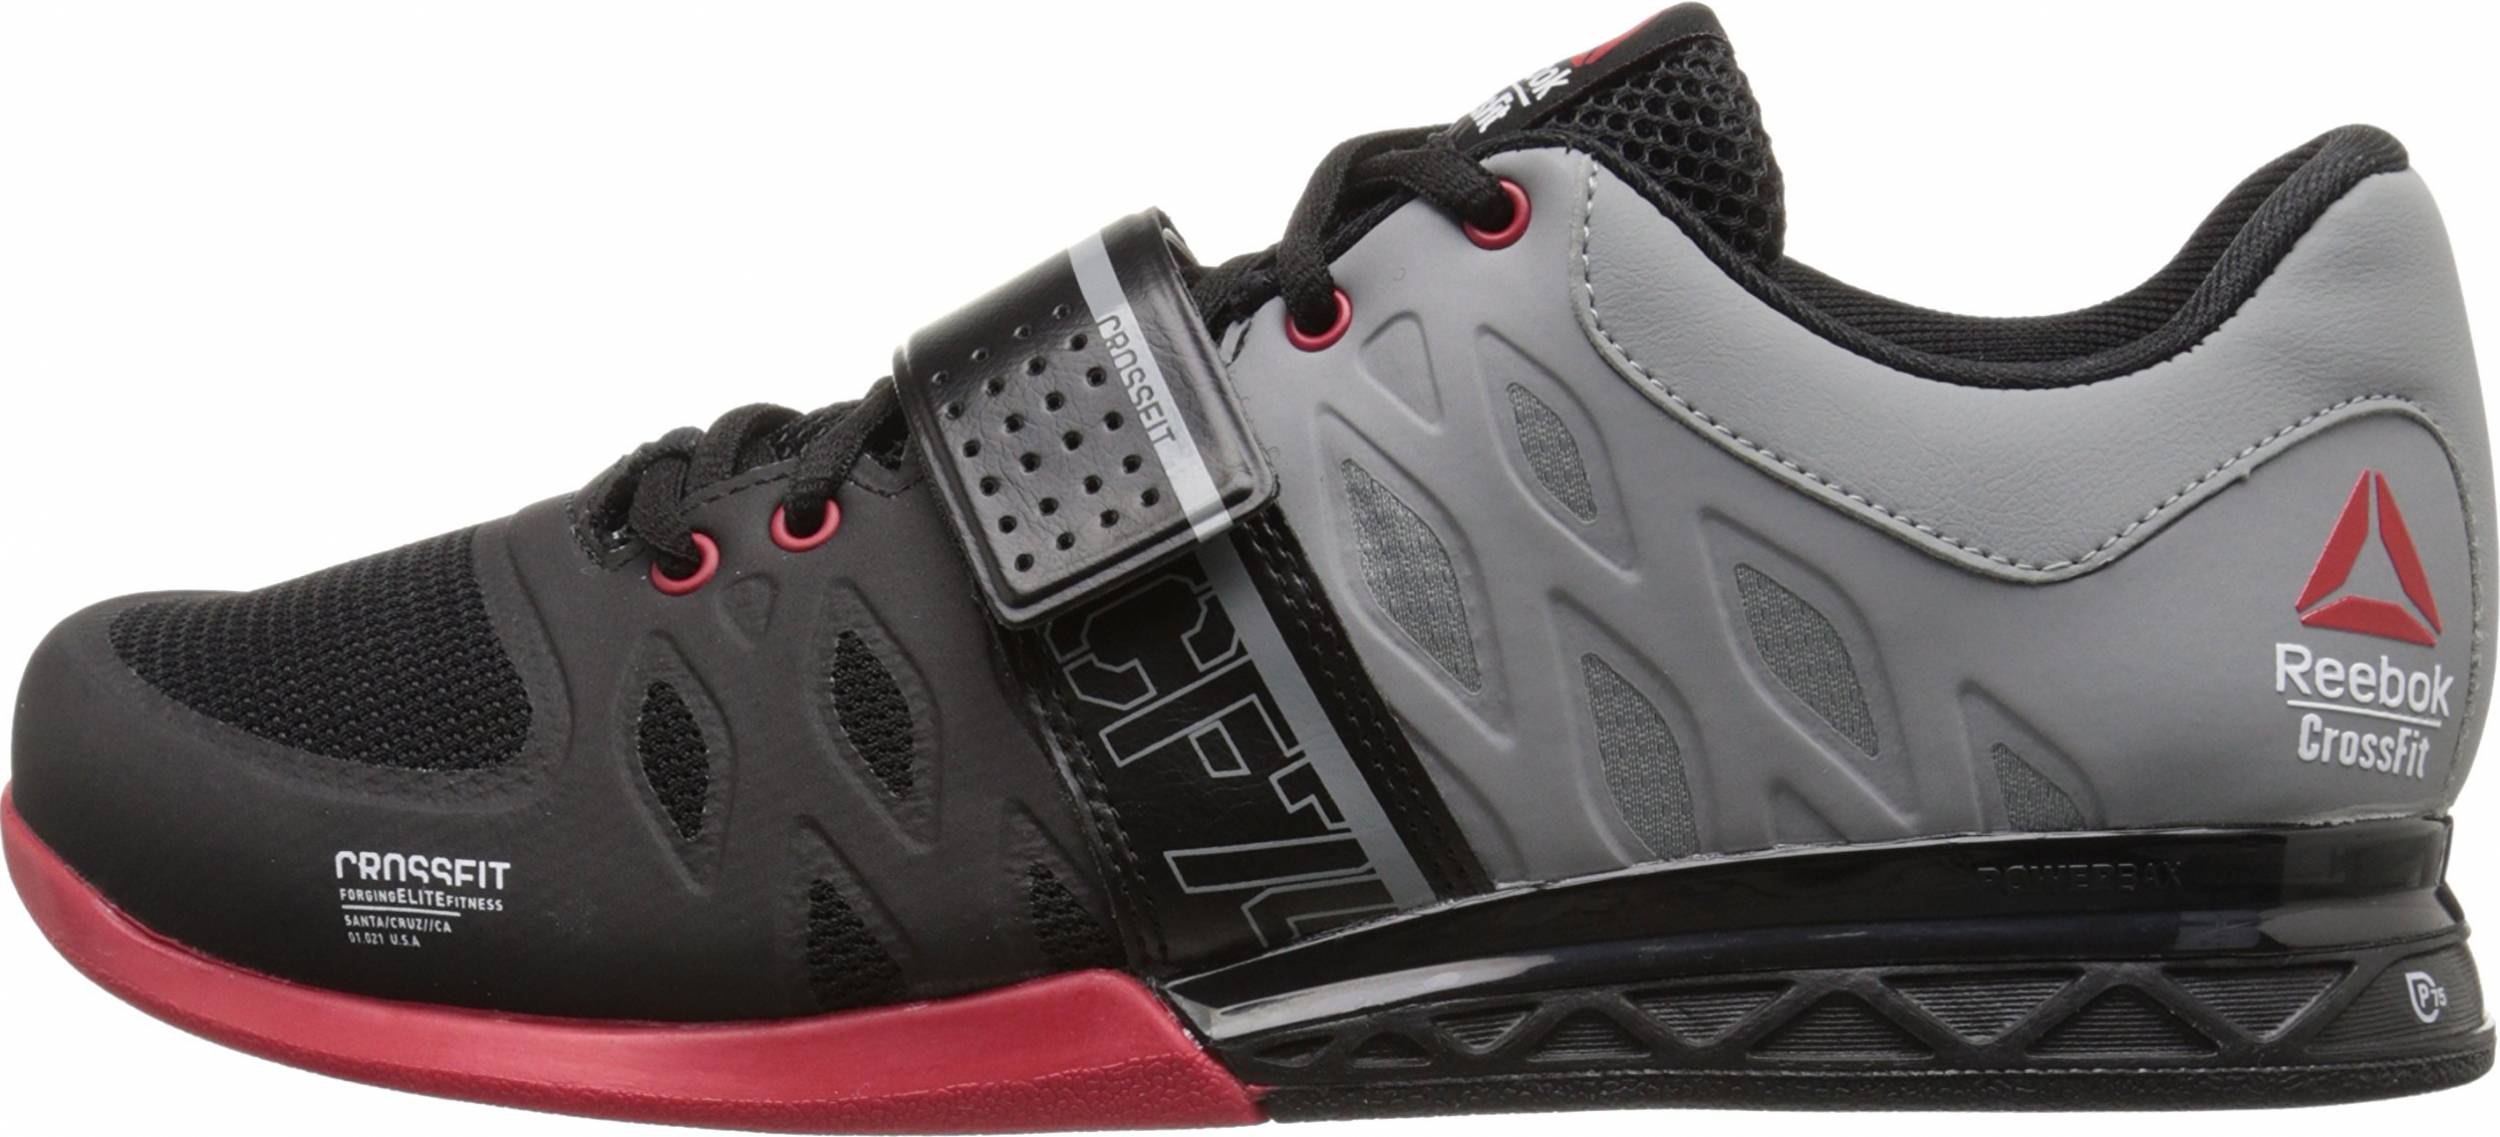 best crossfit lifting shoes